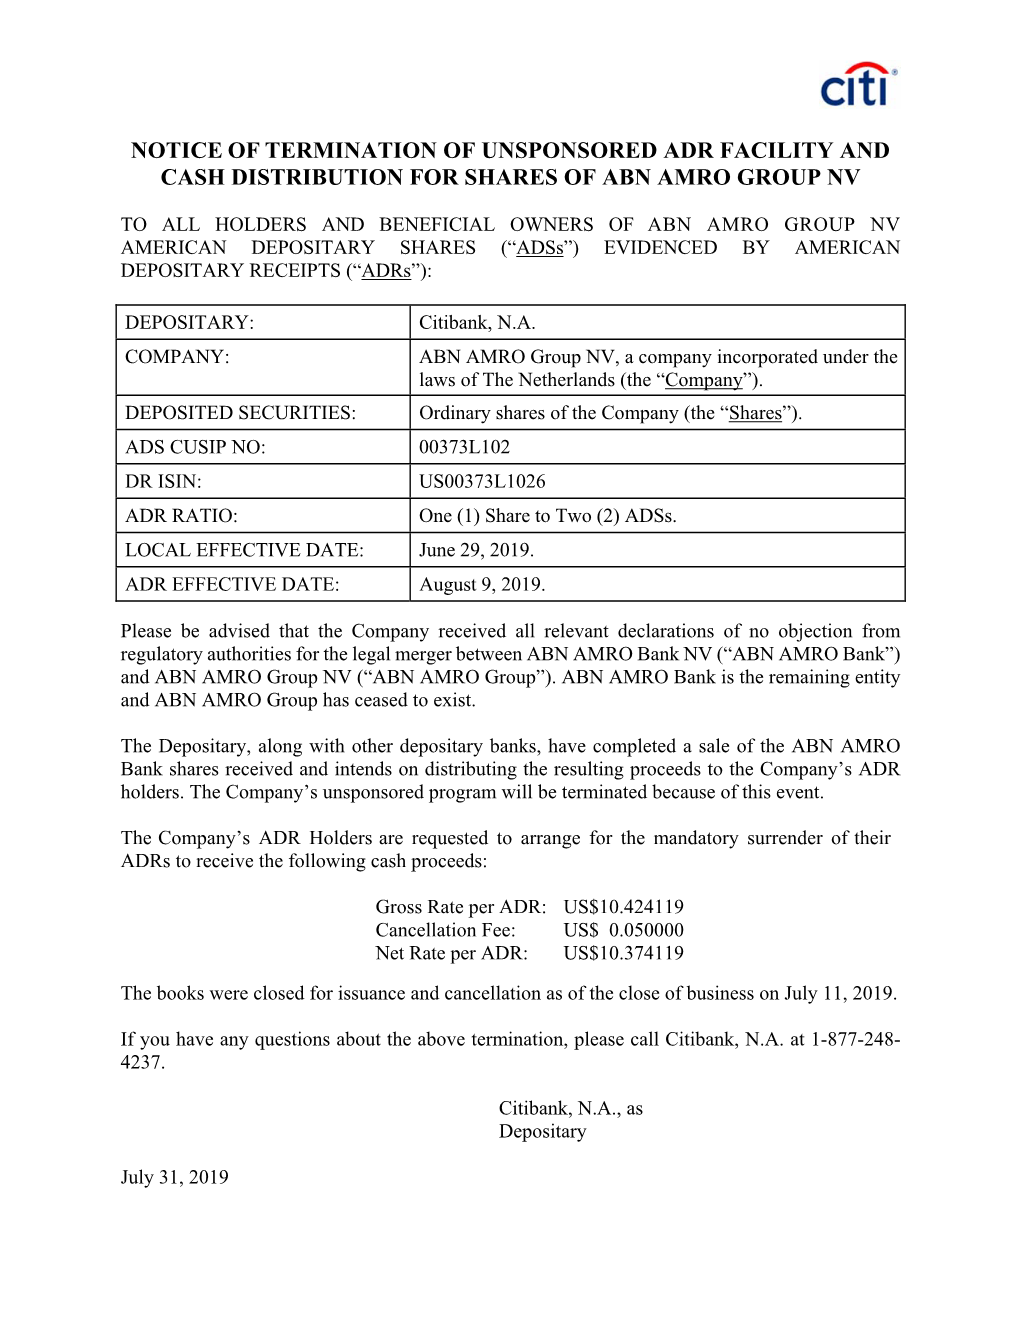 Notice of Termination of Unsponsored Adr Facility and Cash Distribution for Shares of Abn Amro Group Nv